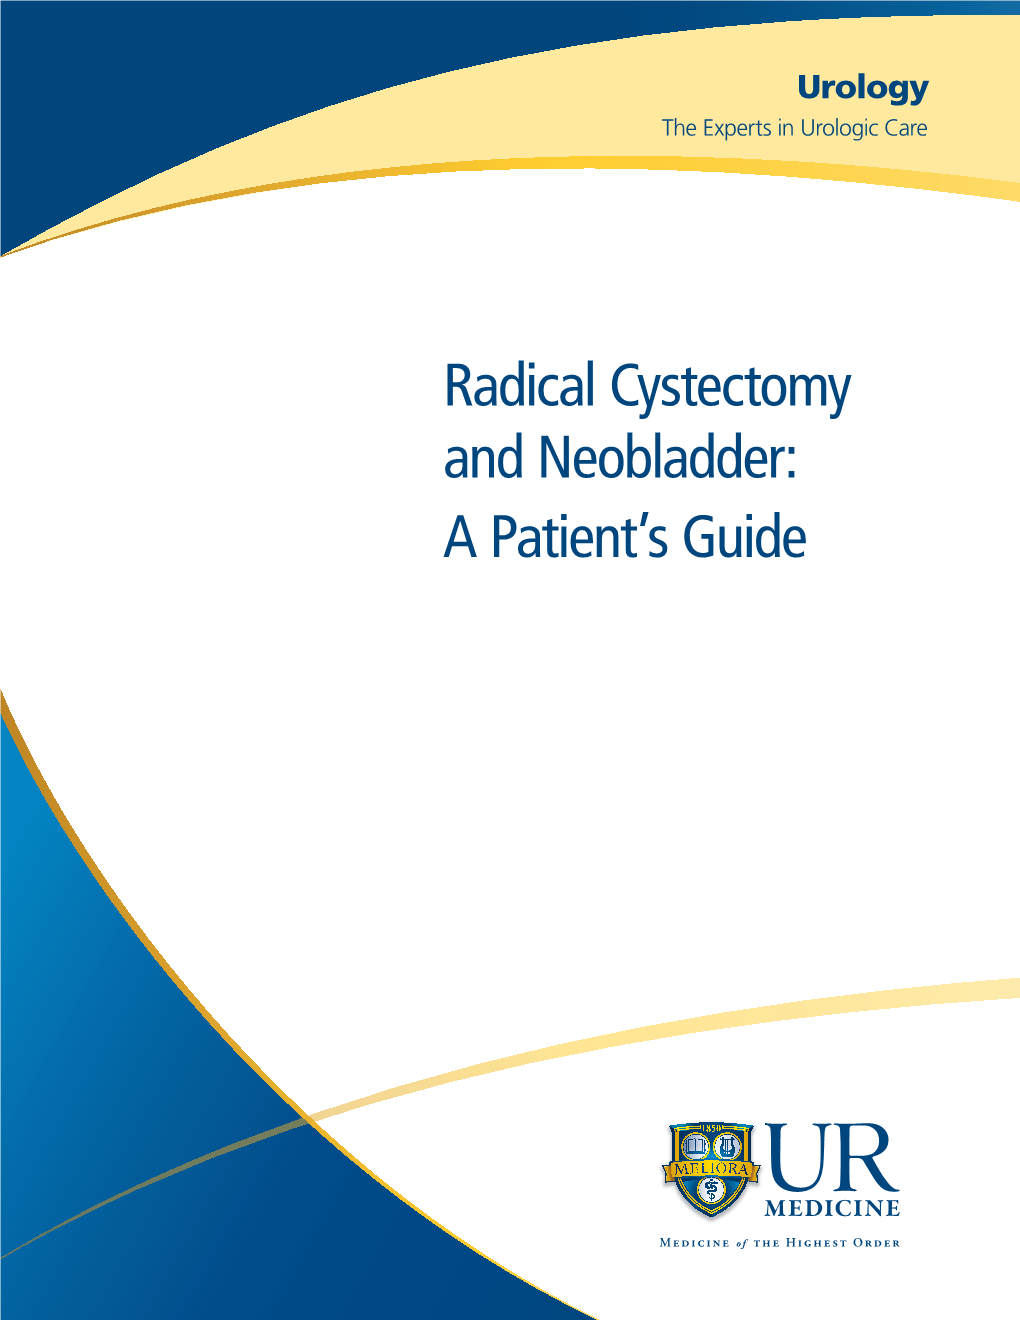 Radical Cystectomy and Neobladder: a Patient's Guide